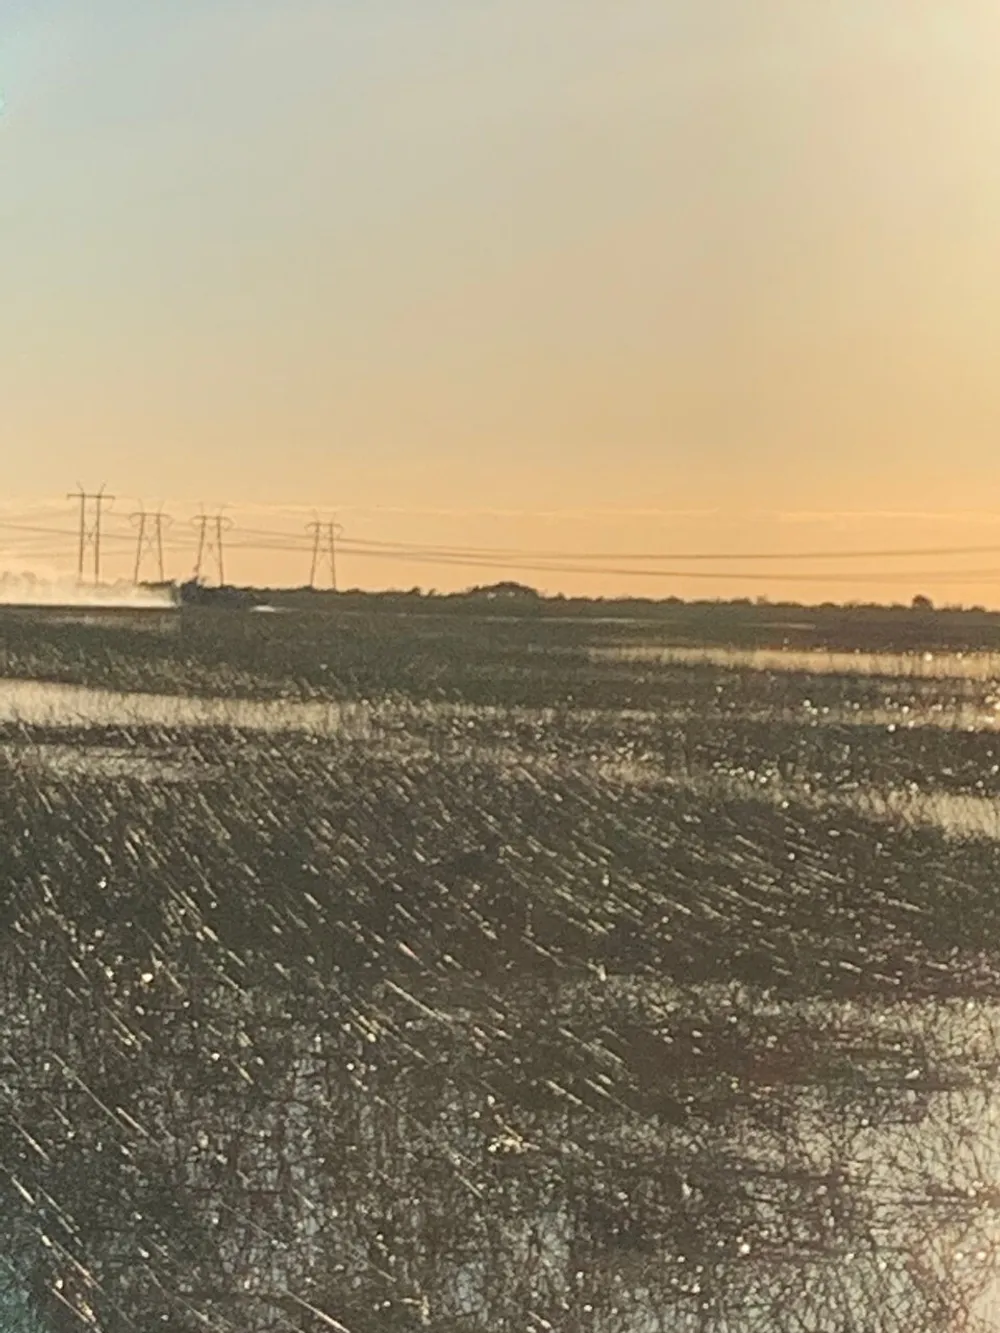 The image captures a serene landscape at dusk with power lines silhouetted against the sky and a field or body of water glistening in the foreground